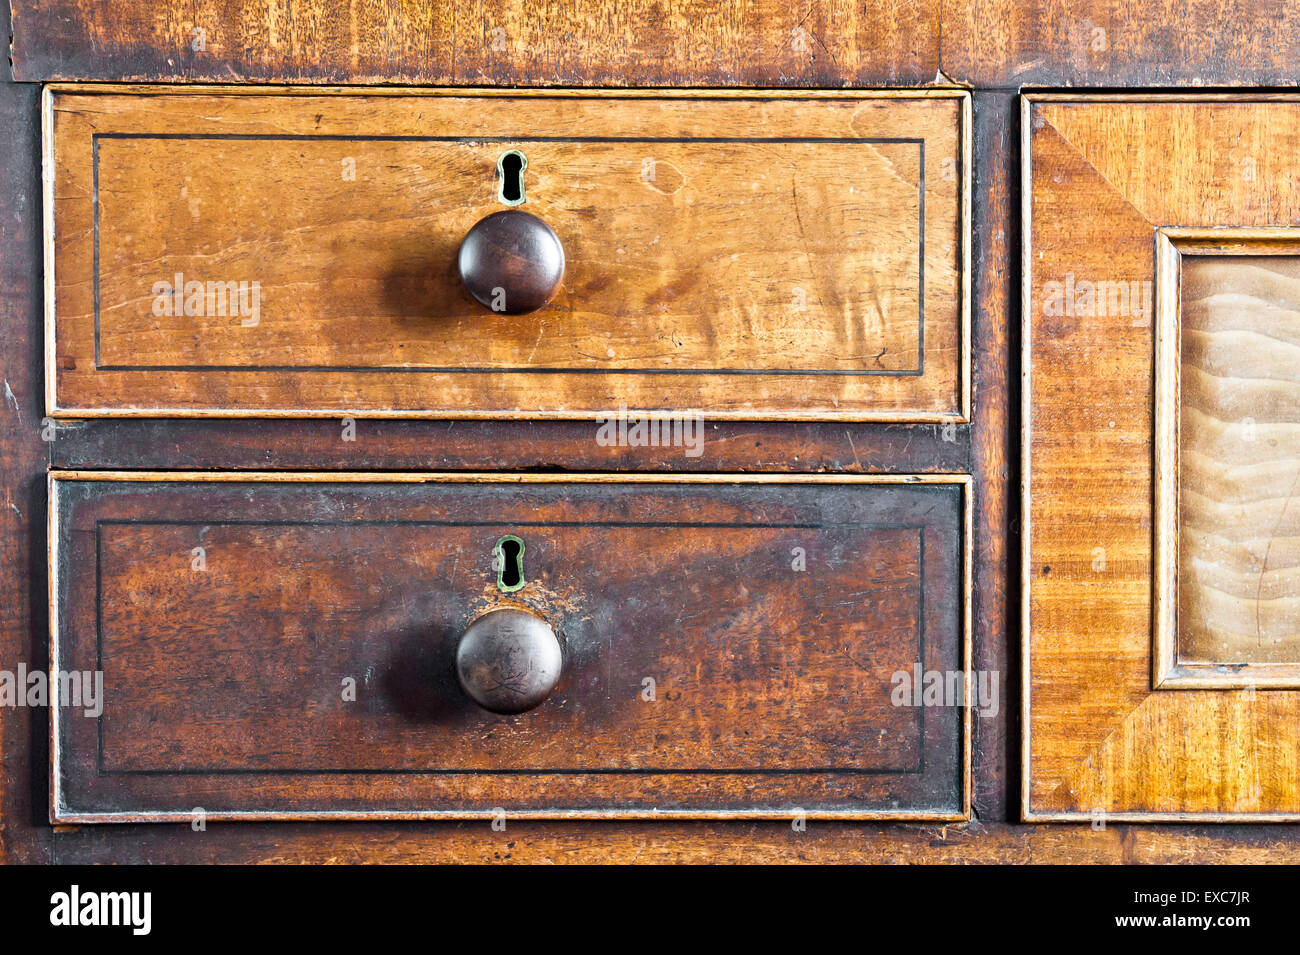 Part of an antique chest with wooden drawers Stock Photo